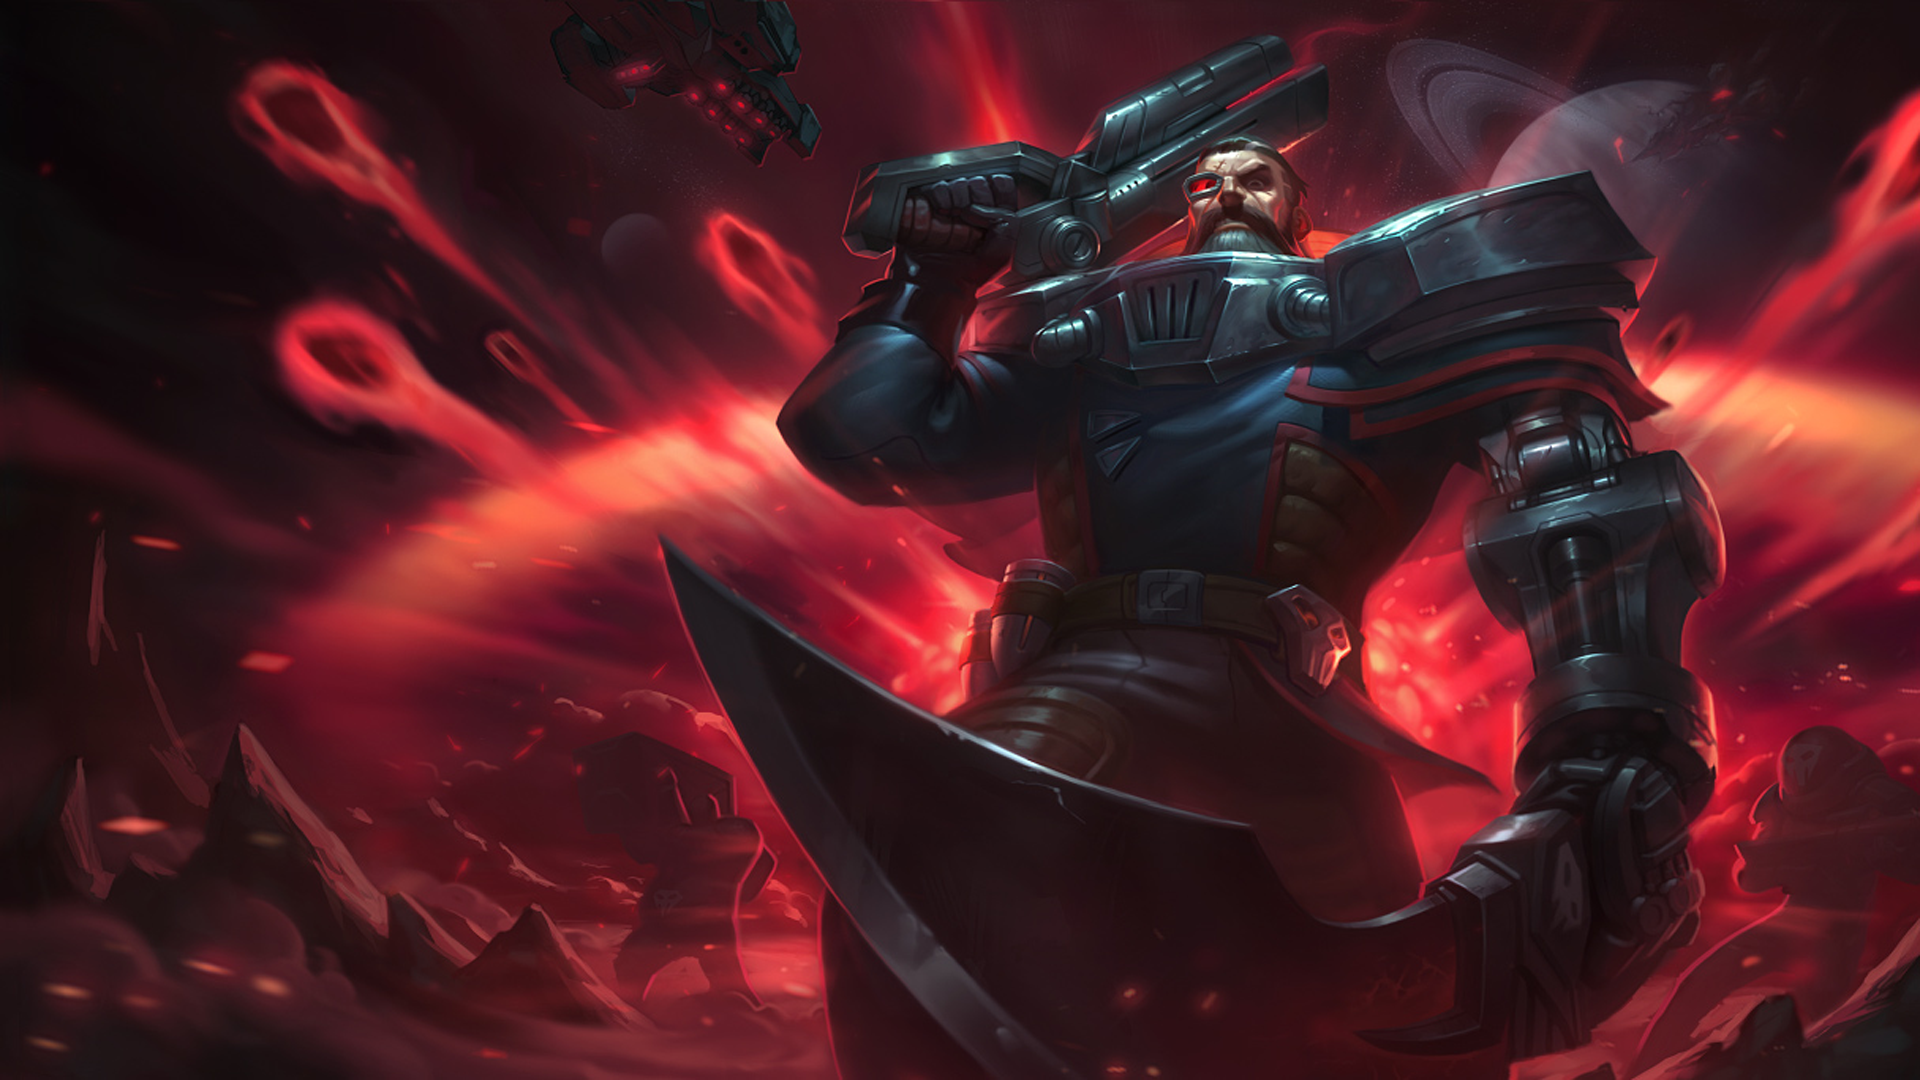 General 1920x1080 Summoner's Rift Gangplank planet red background Gangplank (League of Legends) PC gaming crossover video game art video game men League of Legends